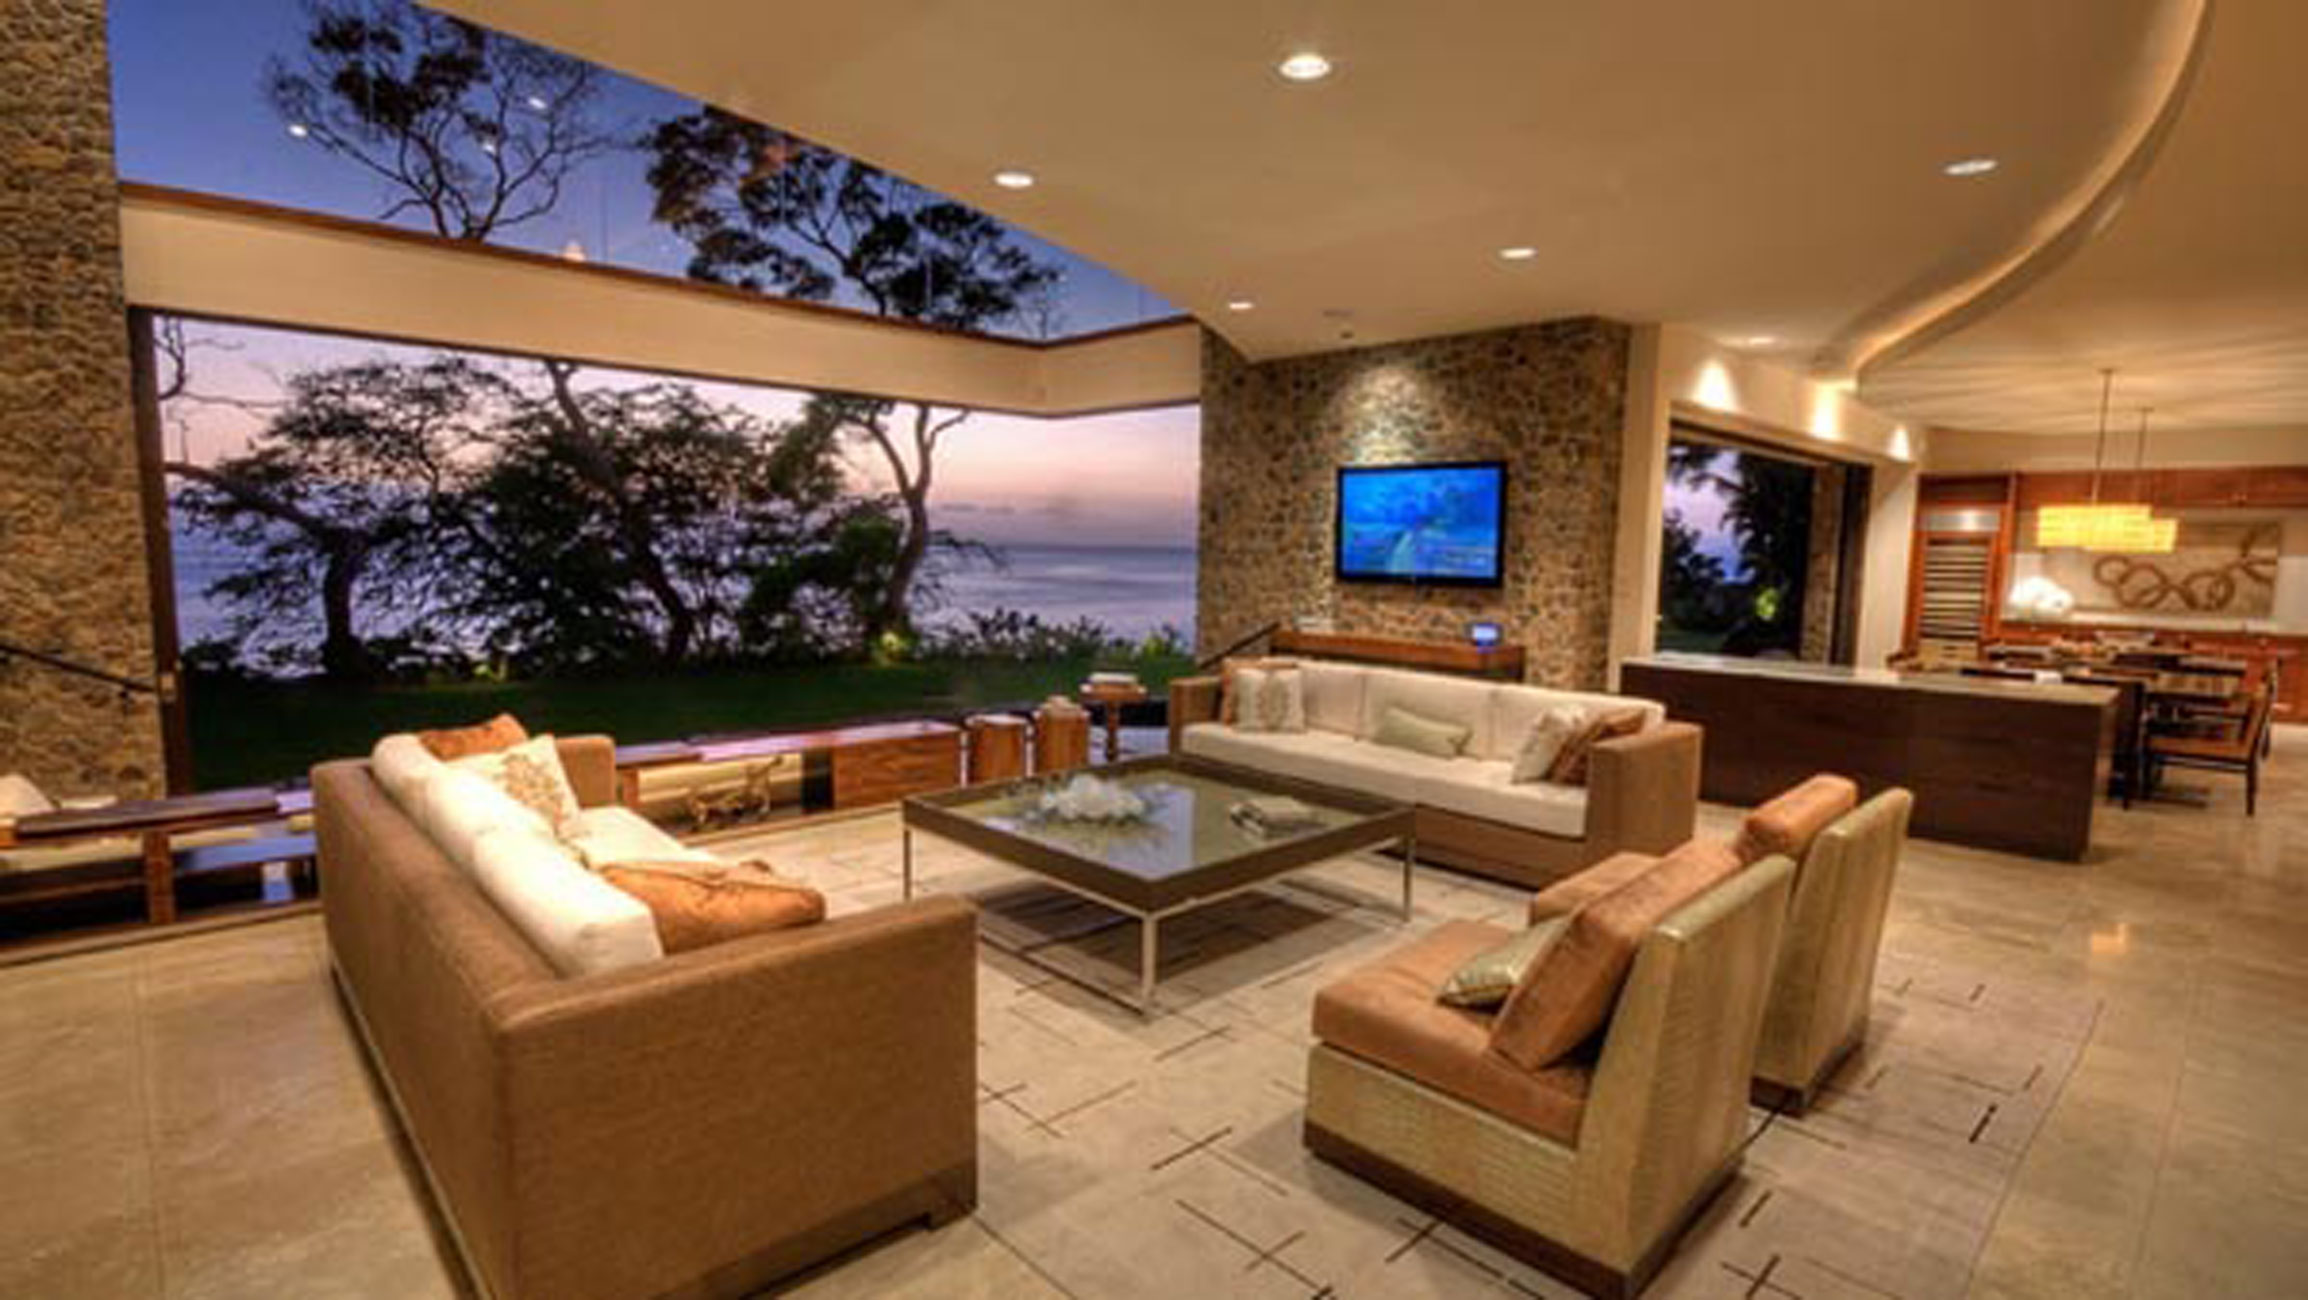 Luxurious Villa Design in Hawaii with Great Landscapes - Livingroom ...